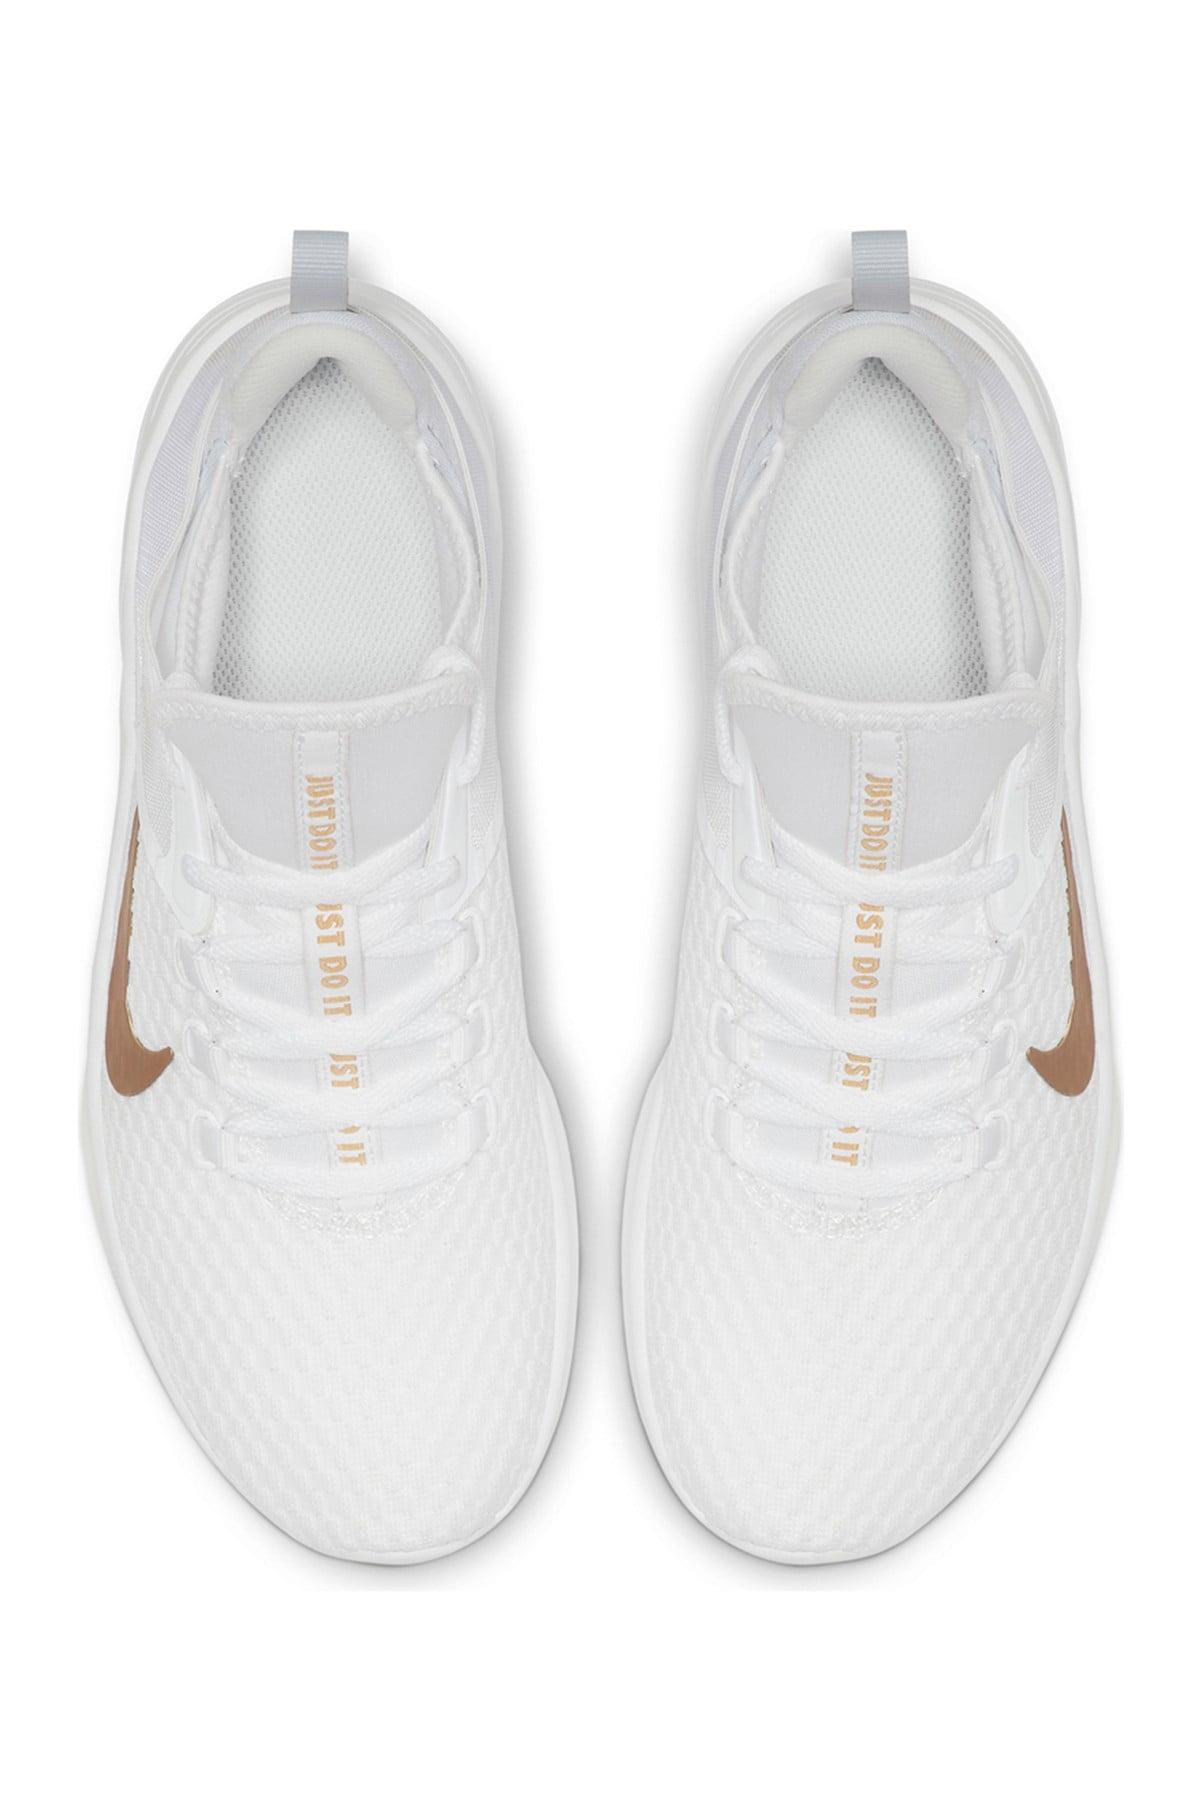 Nike Synthetic Air Max Bella Tr 2 Training Shoe in White | Lyst